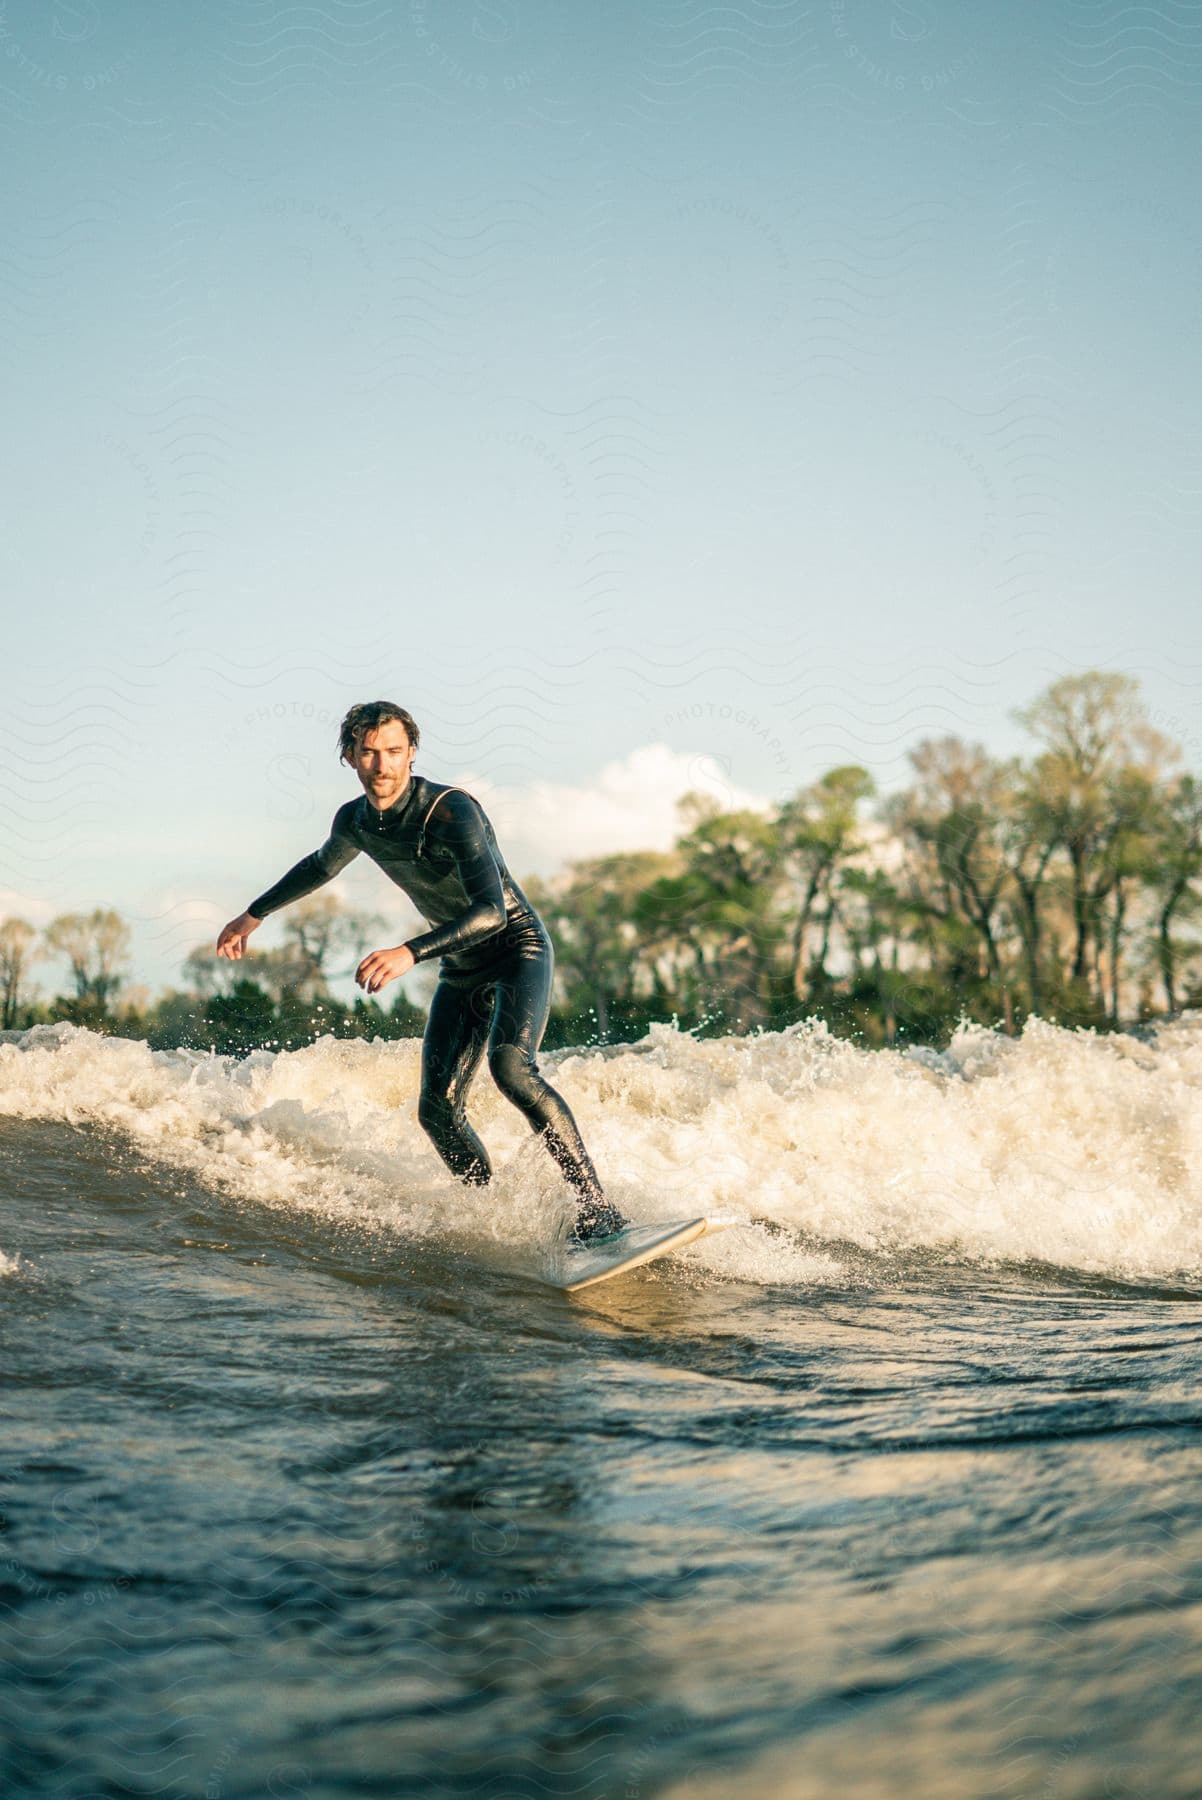 A man wearing a wet suit is surfing a wave as he rides into shore